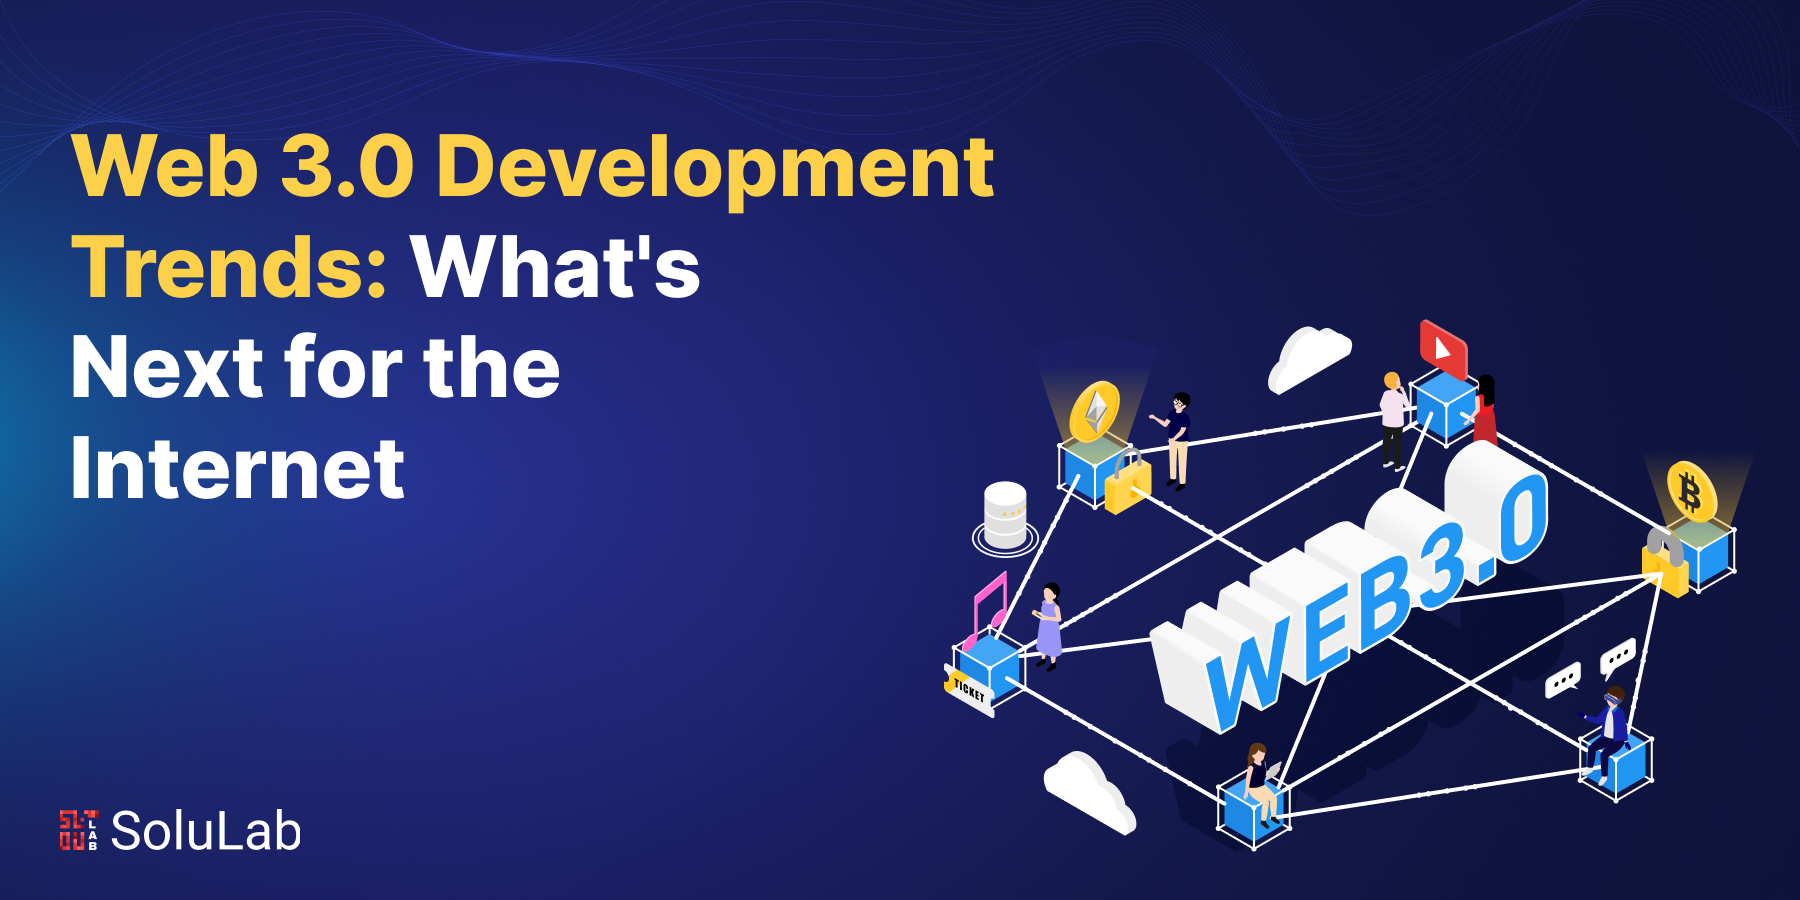 Web 3.0 Development Trends: What's Next for the Internet